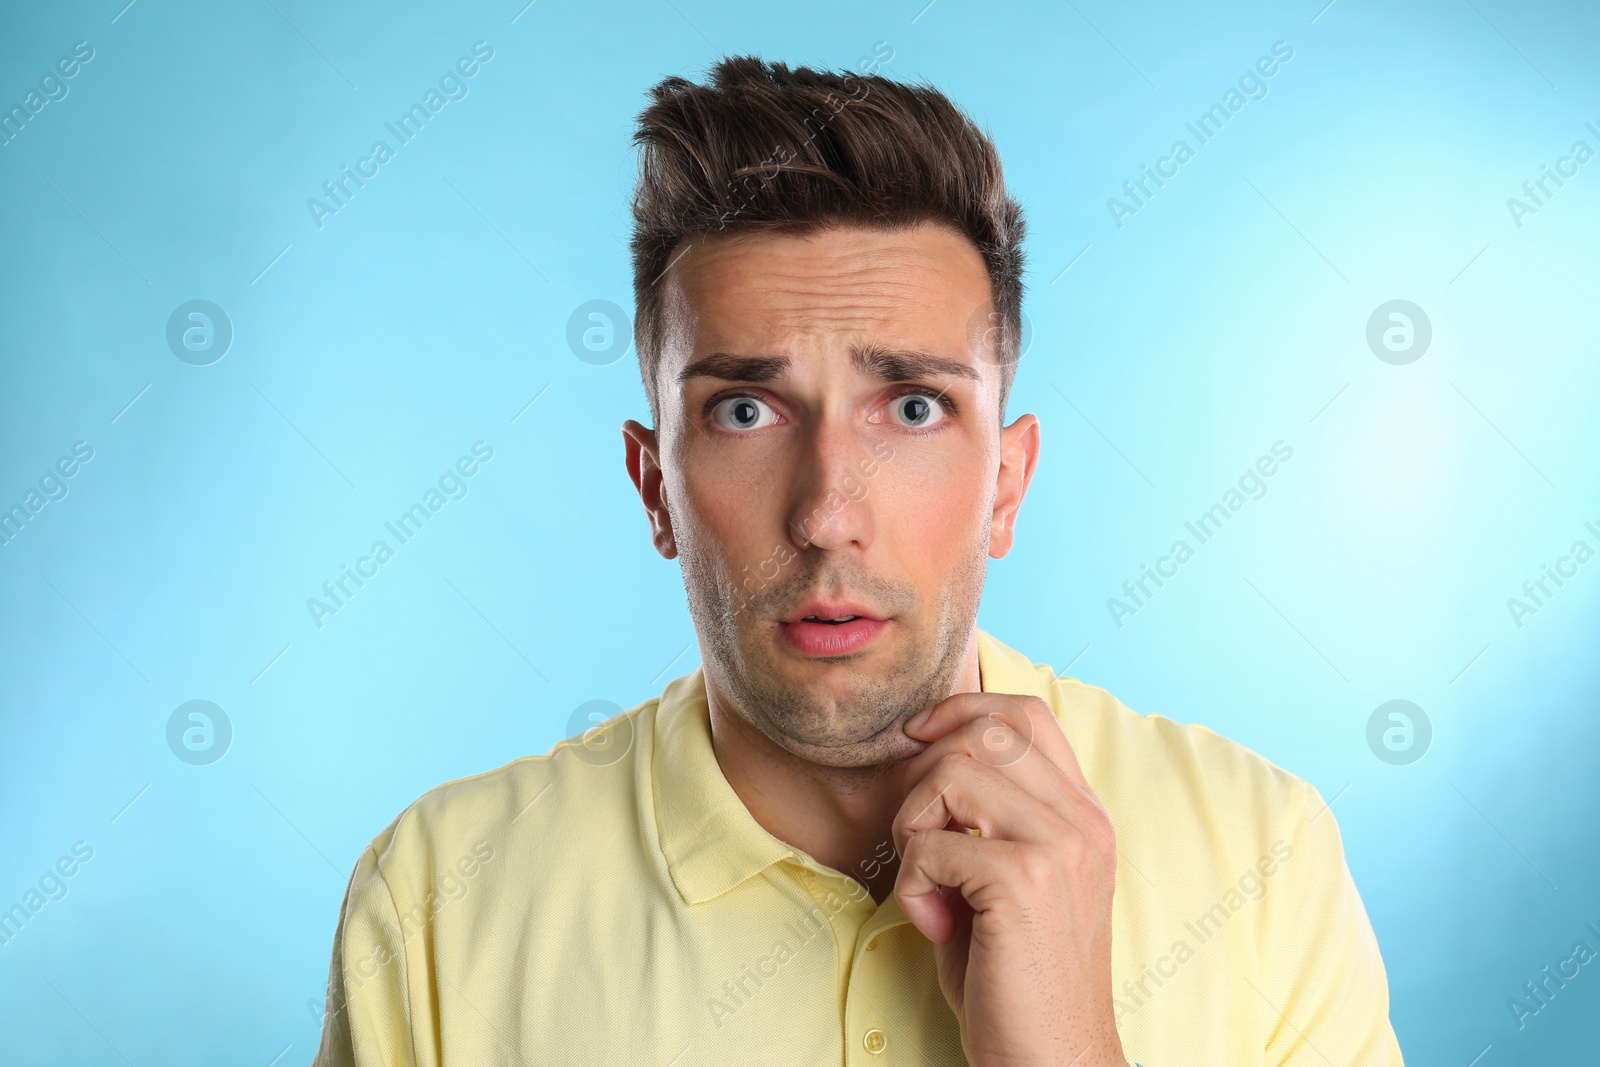 Photo of Emotional young man with double chin on blue background